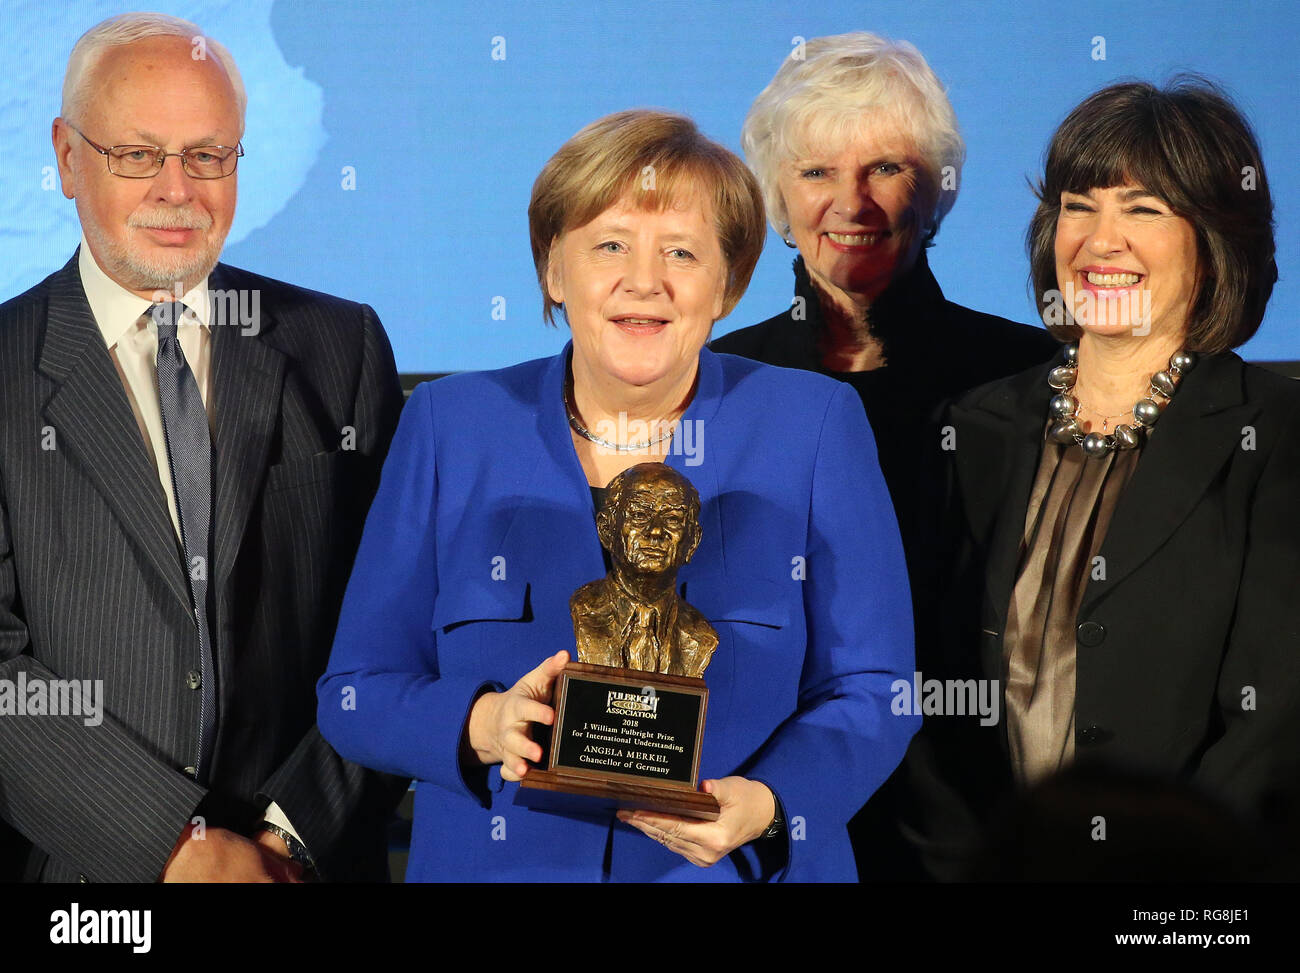 Berlin, Germany. 28th Jan, 2019. Chancellor Angela Merkel (CDU) receives the American Fulbright Prize for International Understanding at the Axica Congress and Convention Center. After the award ceremony, Chancellor Angela Merkel (M) will meet Manfred Philipp (l-r), Vice President of the Fulbright Association, Mary Ellen Heian Schmider and Christiane Amanpour, CNN journalist. Credit: Wolfgang Kumm/dpa/Alamy Live News Stock Photo